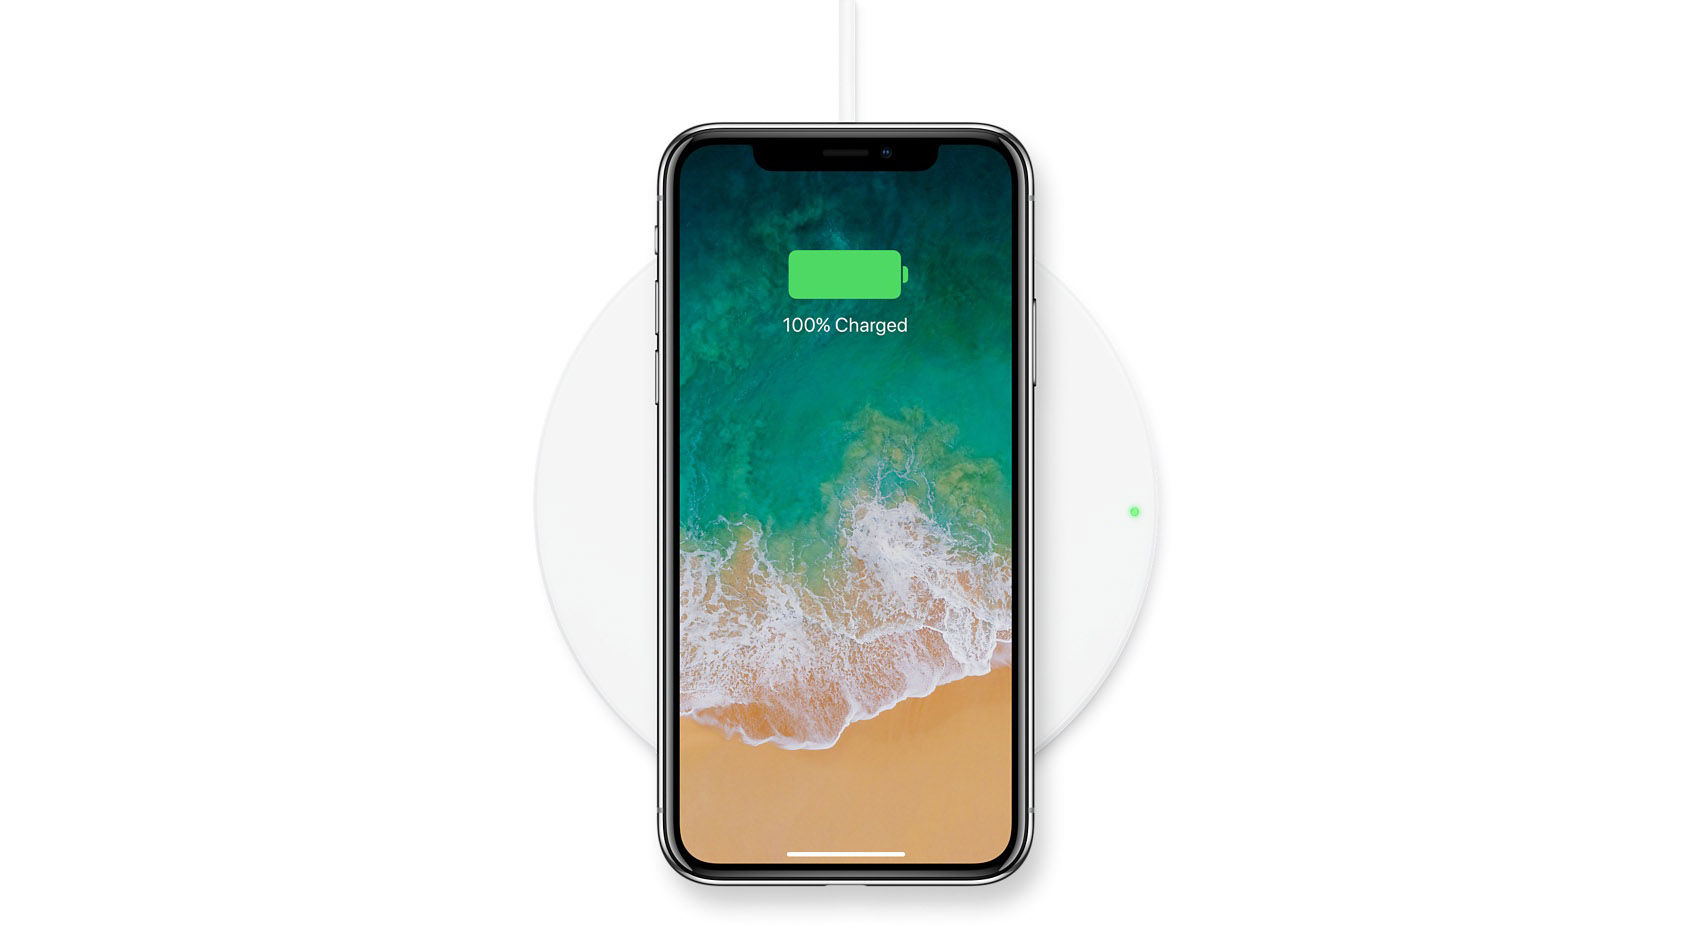 iOS 11.2 Said to Bring Faster Wireless Charging to iPhone X, iPhone 8 and 8 Plus